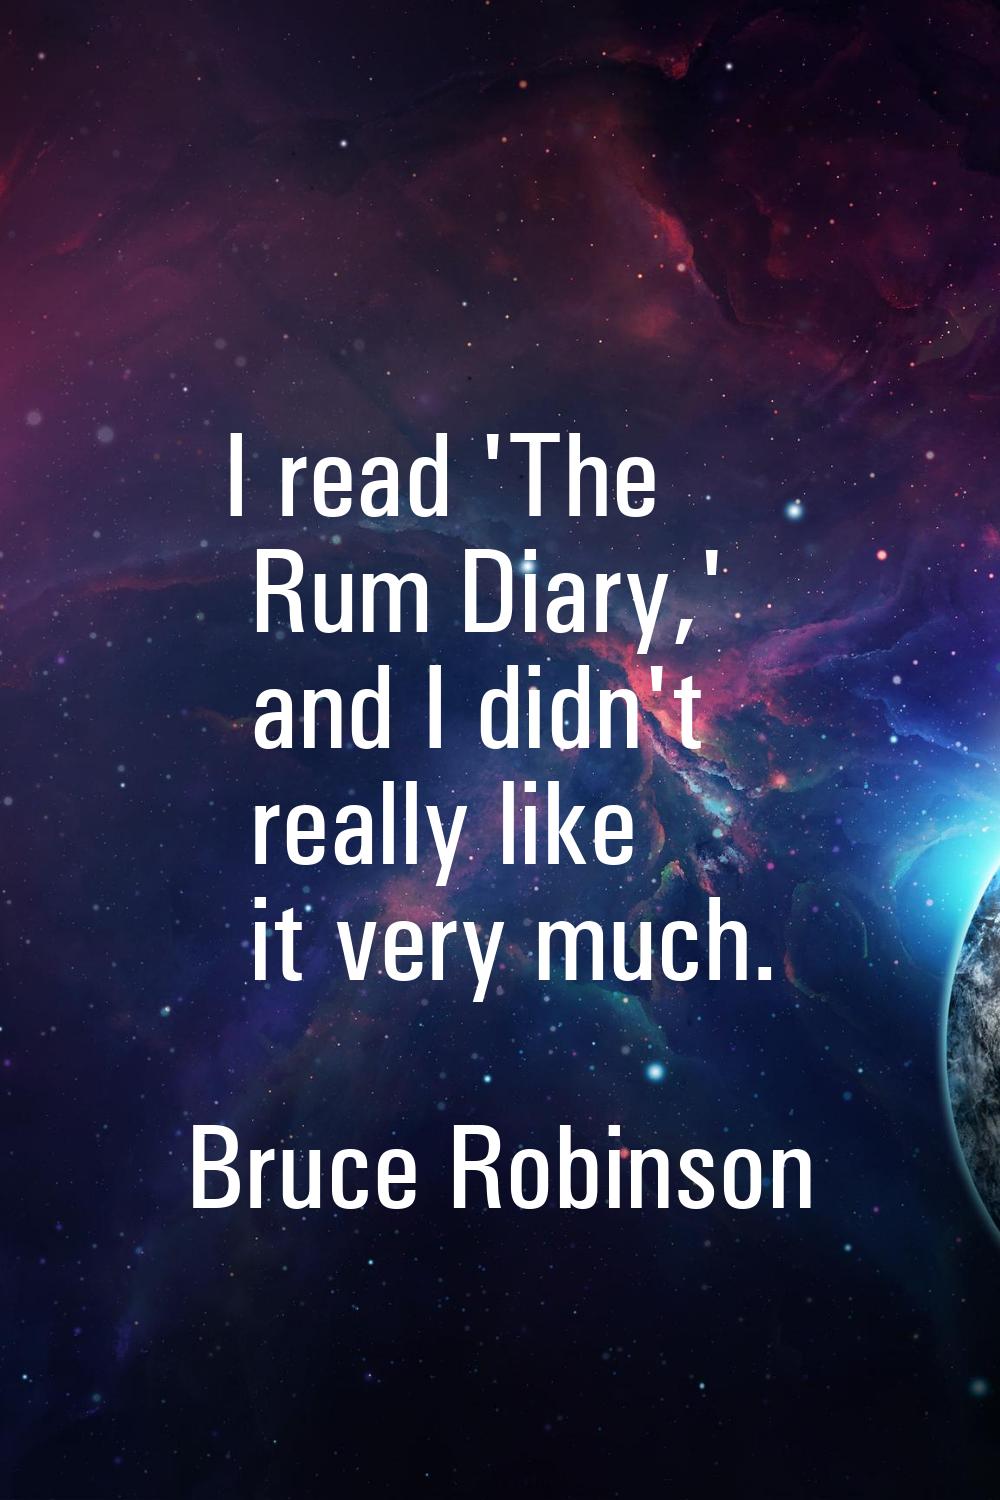 I read 'The Rum Diary,' and I didn't really like it very much.